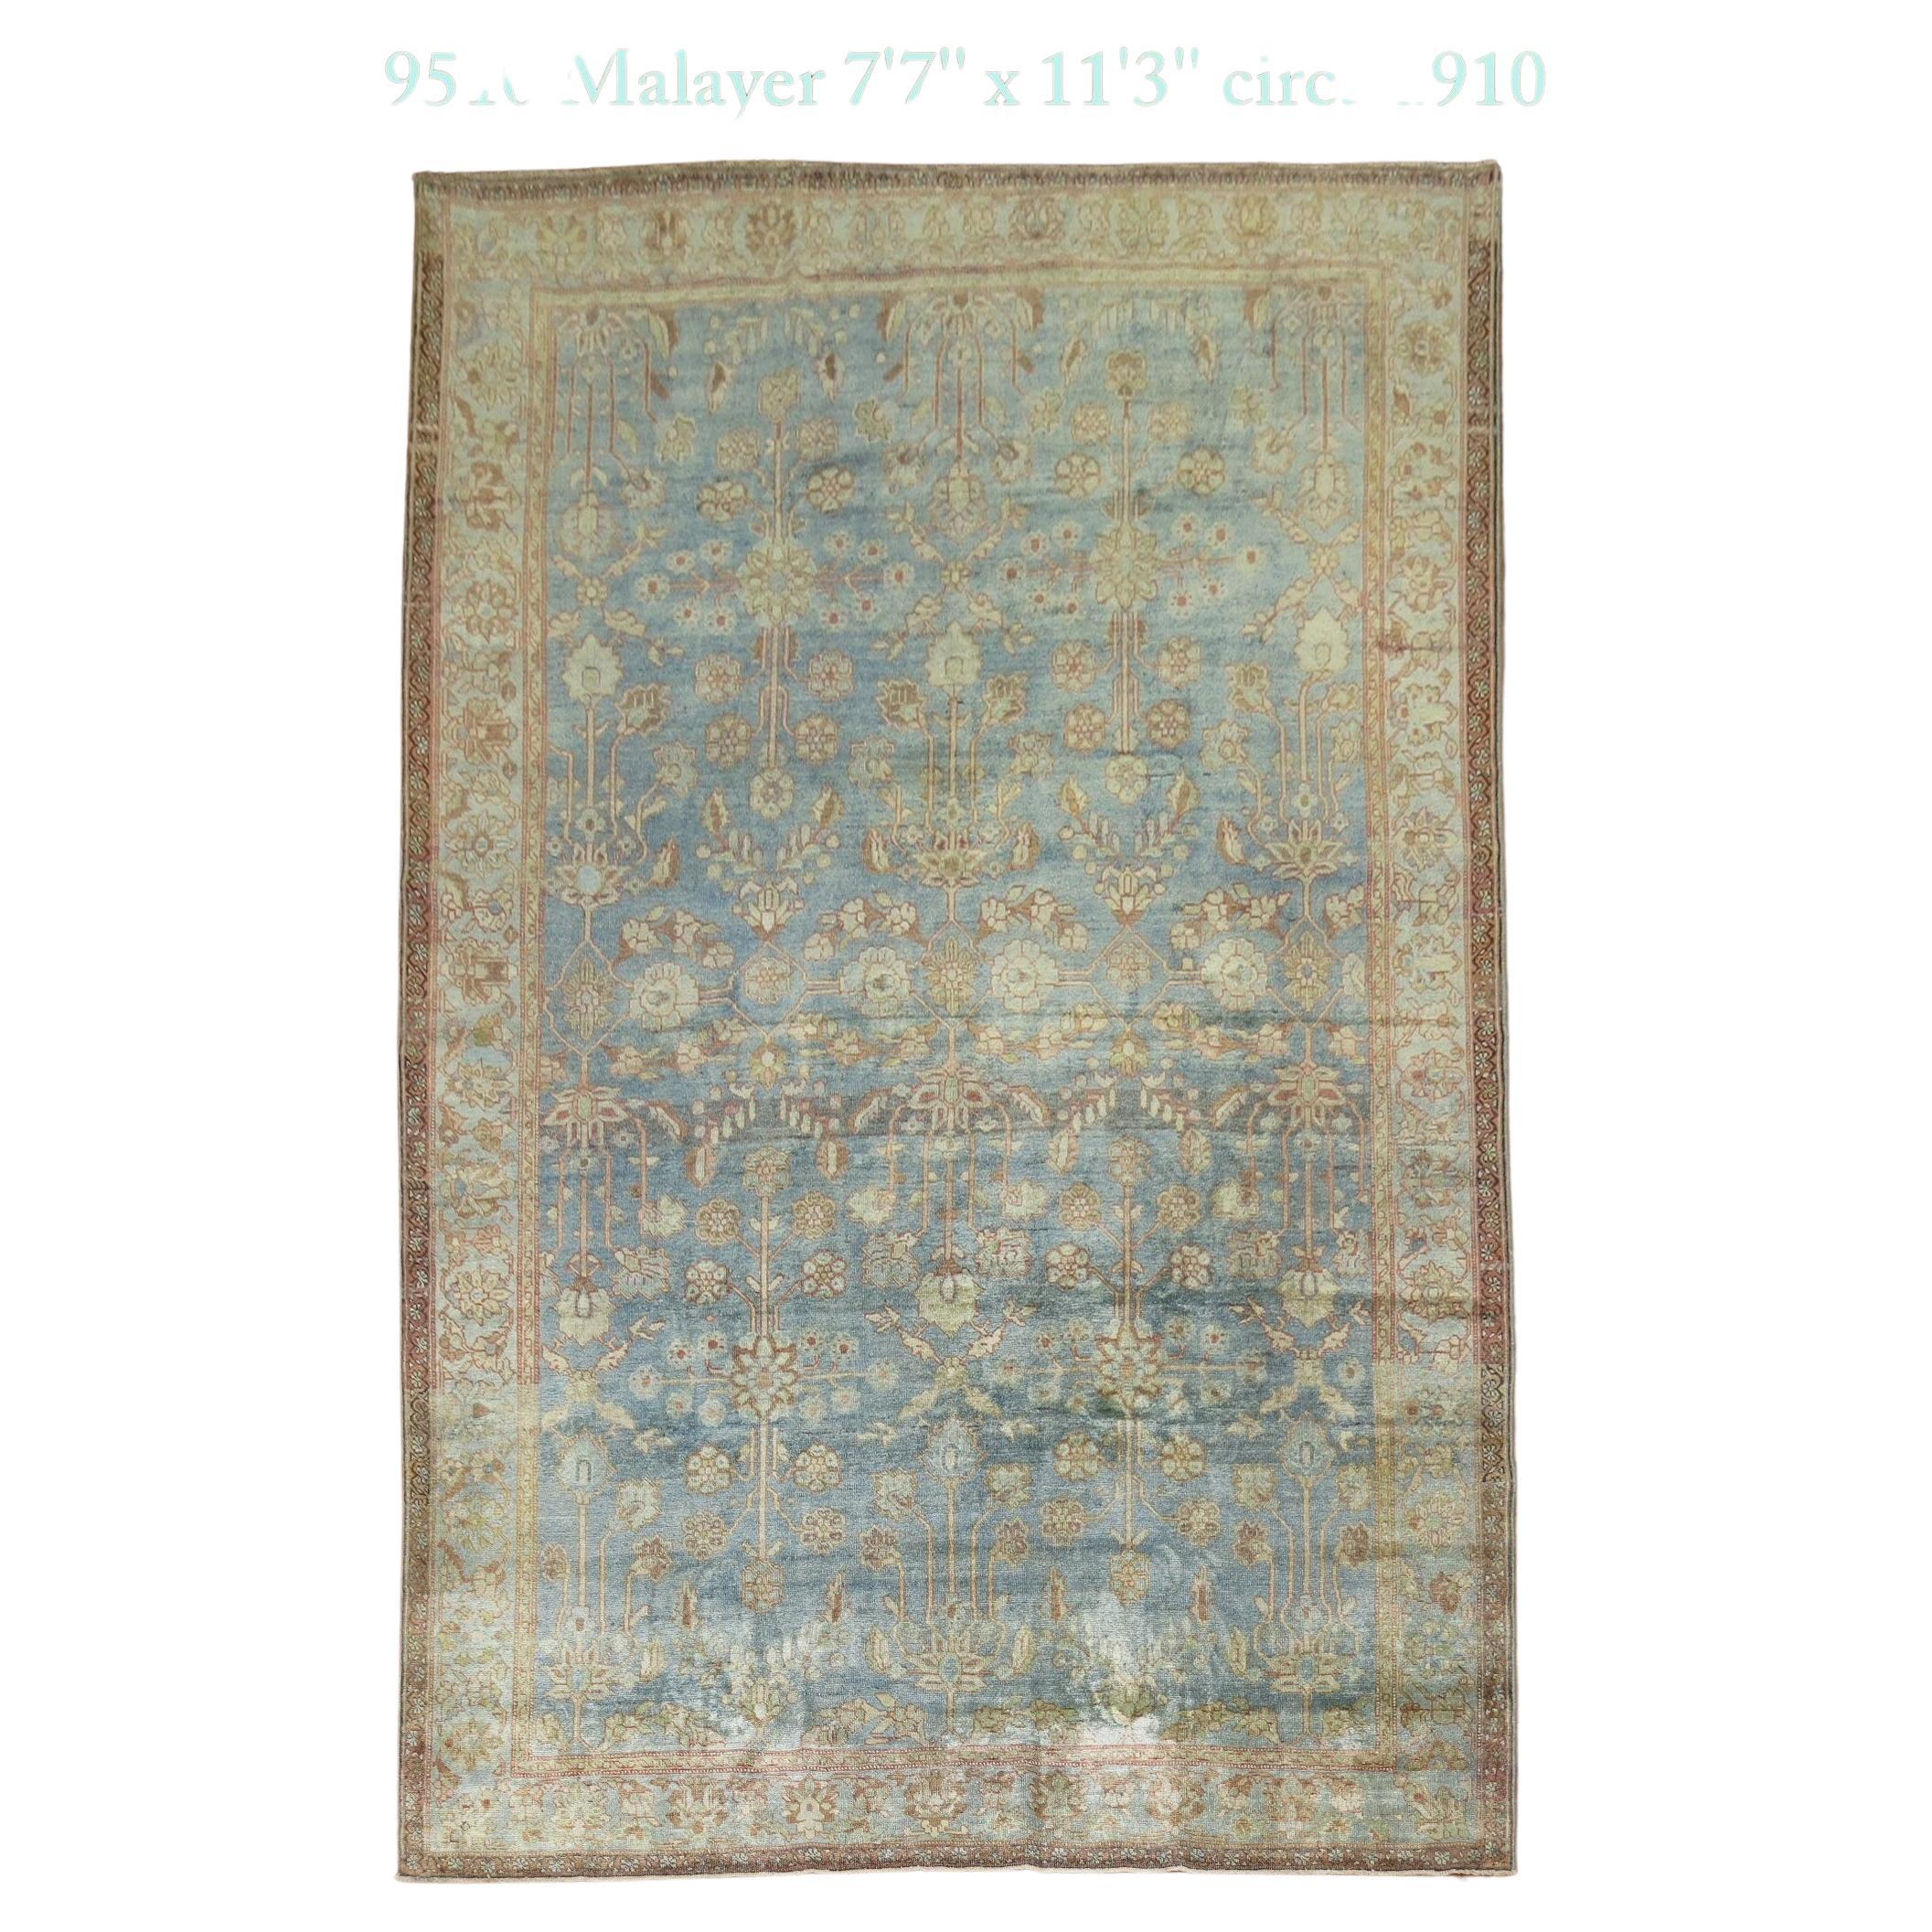 An early 20th century Persian Malayer small room size rug in predominantly light blue

Measures: 7'7